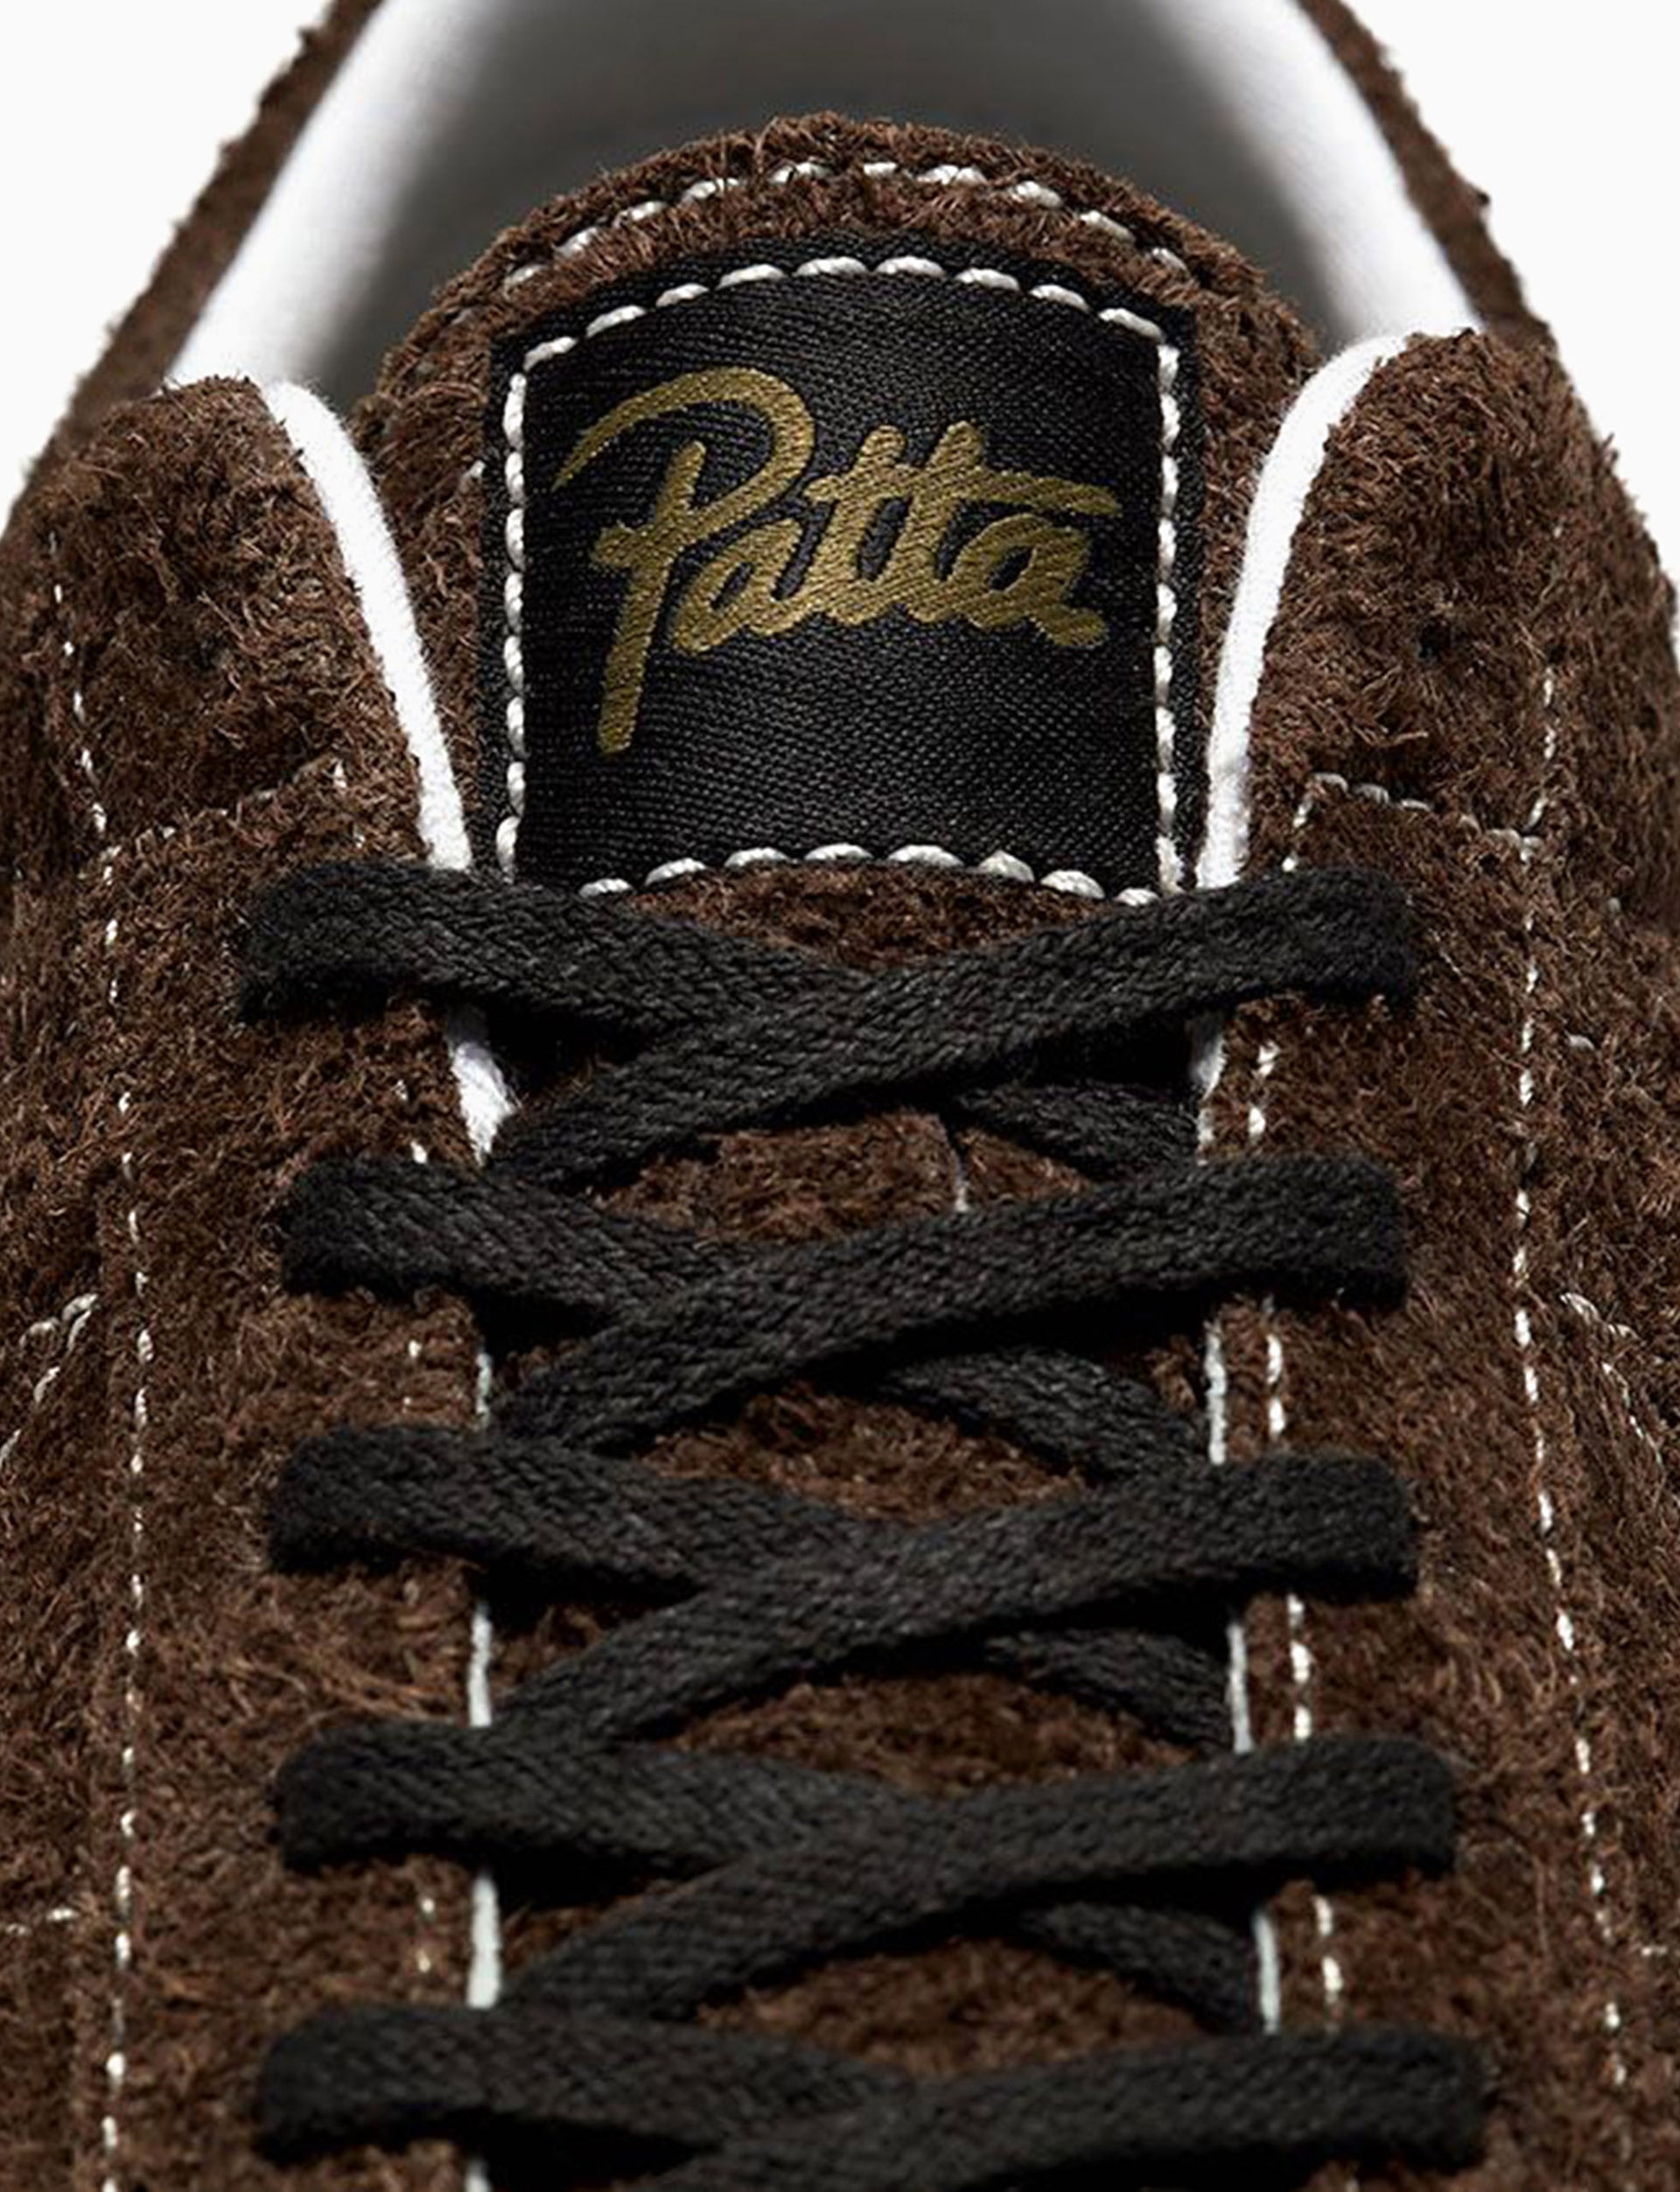 Converse x Patta One Star Pro Low Top "4 Leaf Clover"